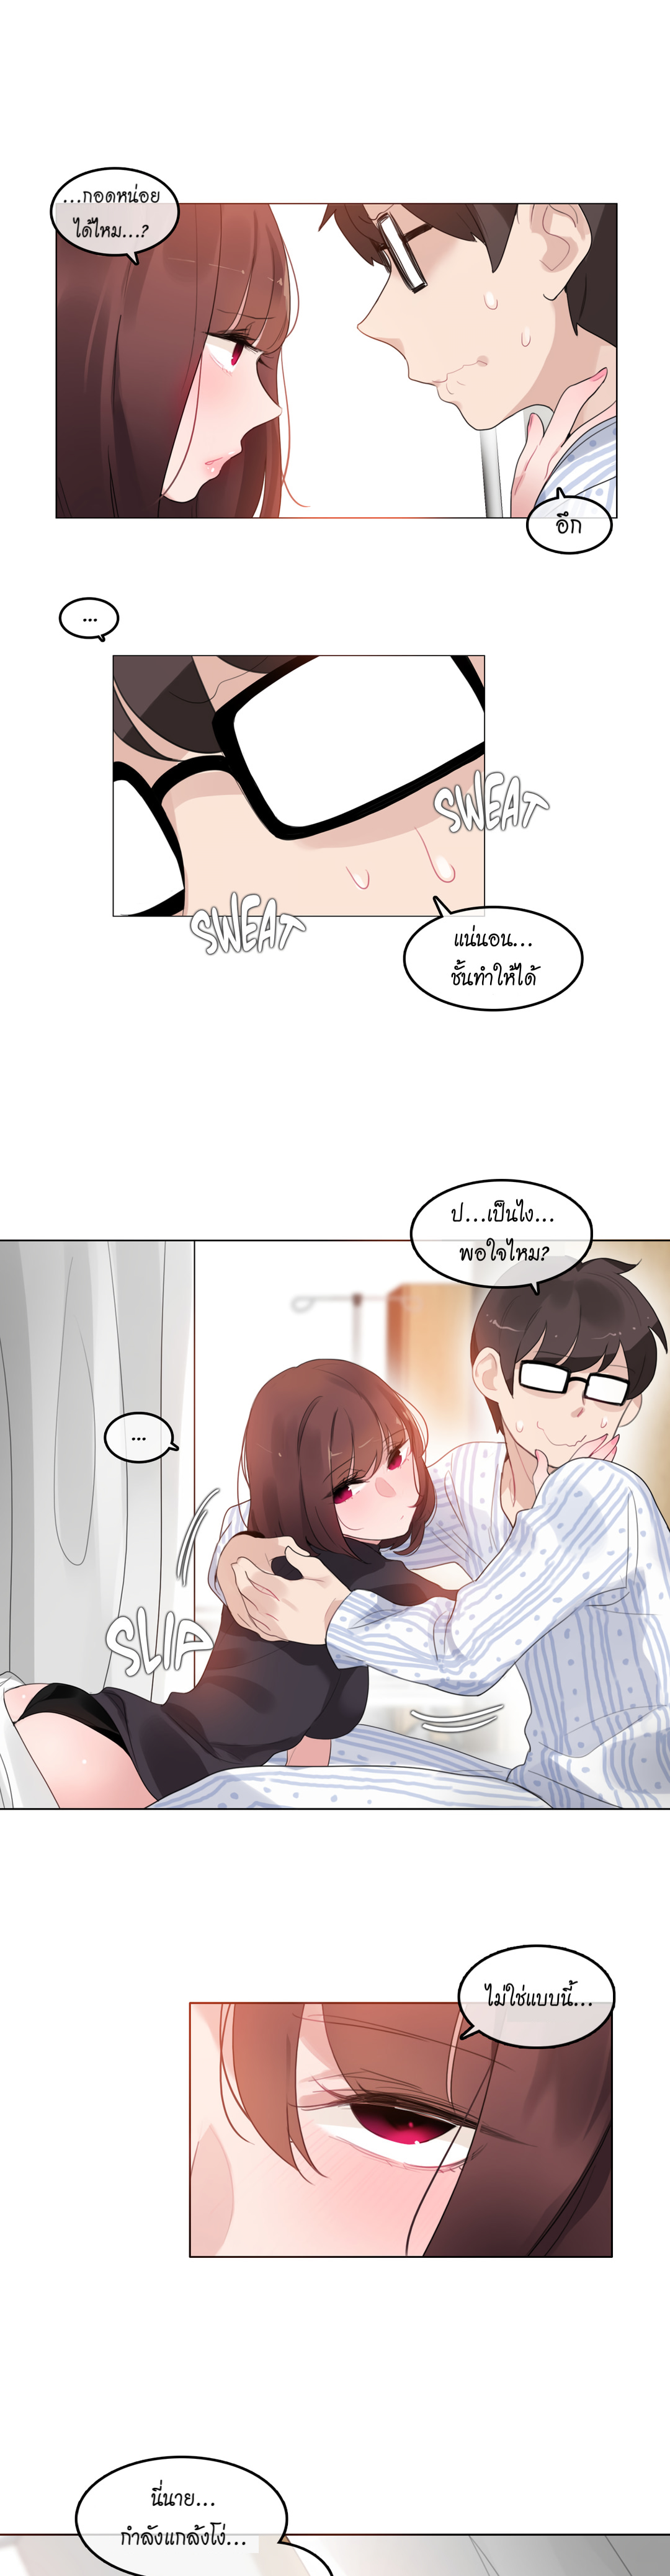 A Pervert’s Daily Life50 (13)